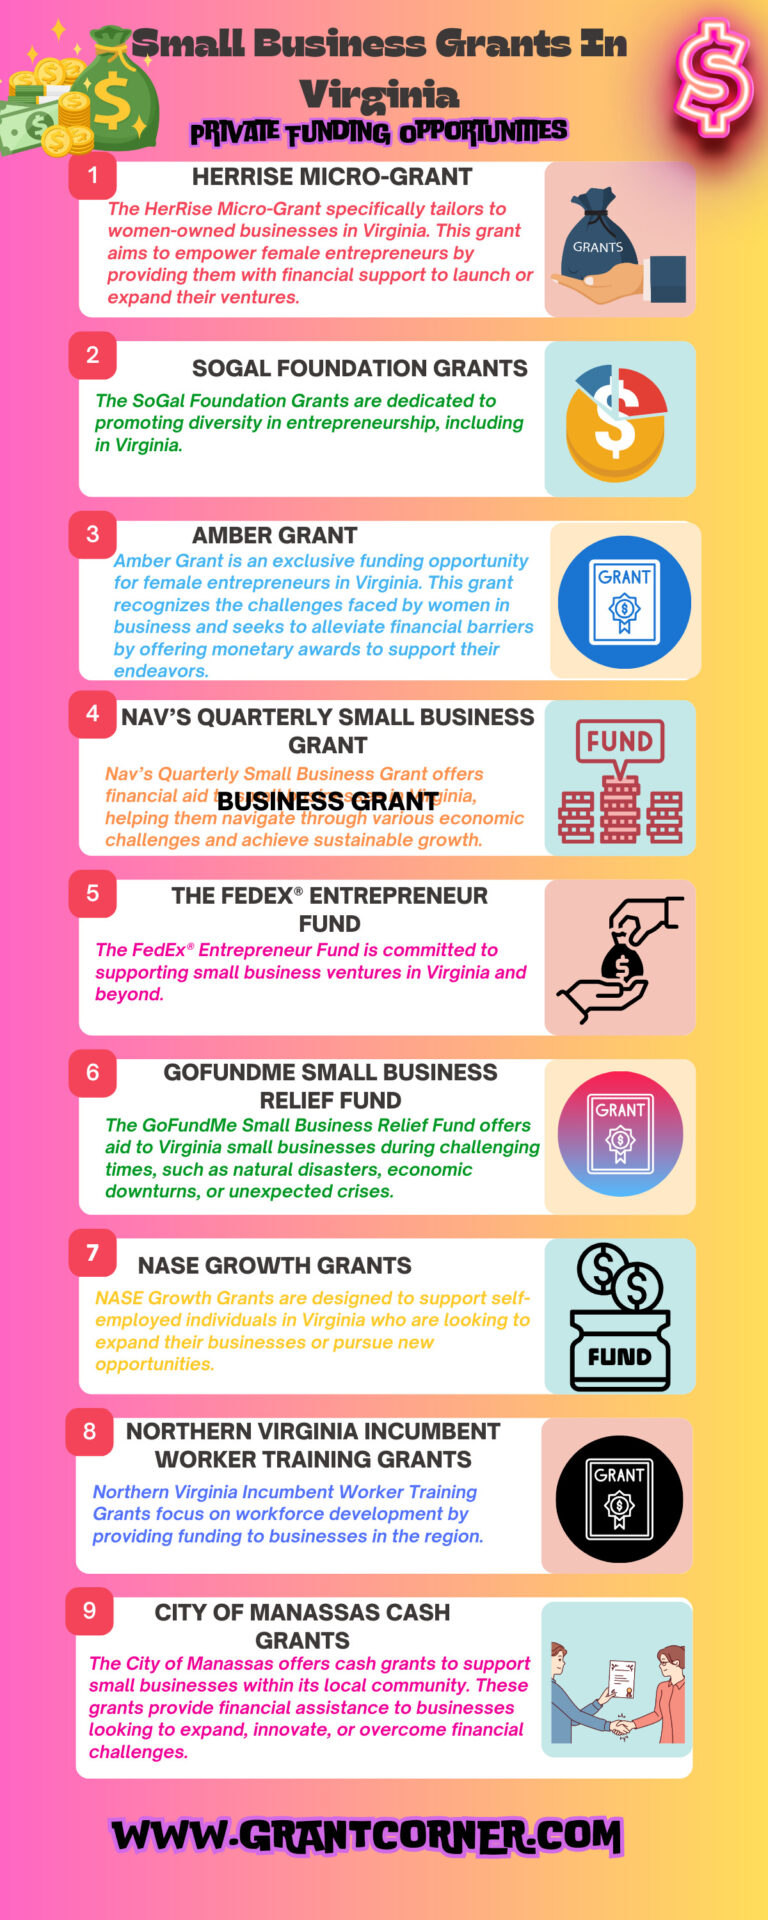 Small Business Grants in Virginia